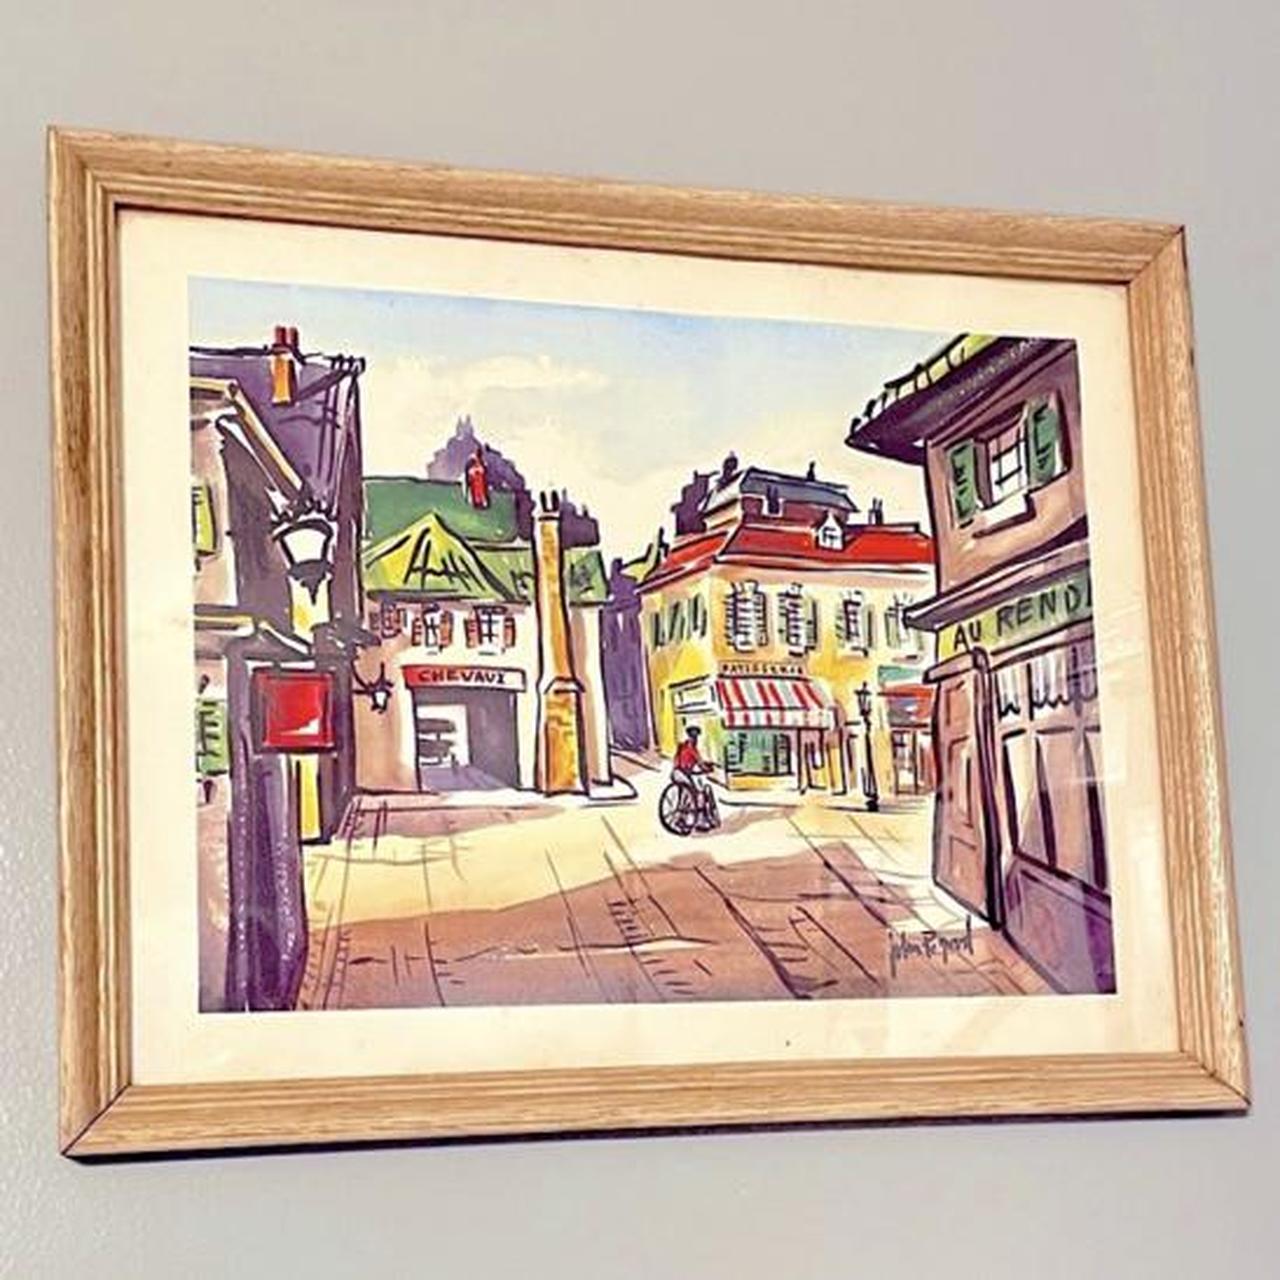 Product Image 3 - ▪️Vintage French Street Watercolor Print▪️
Vintage